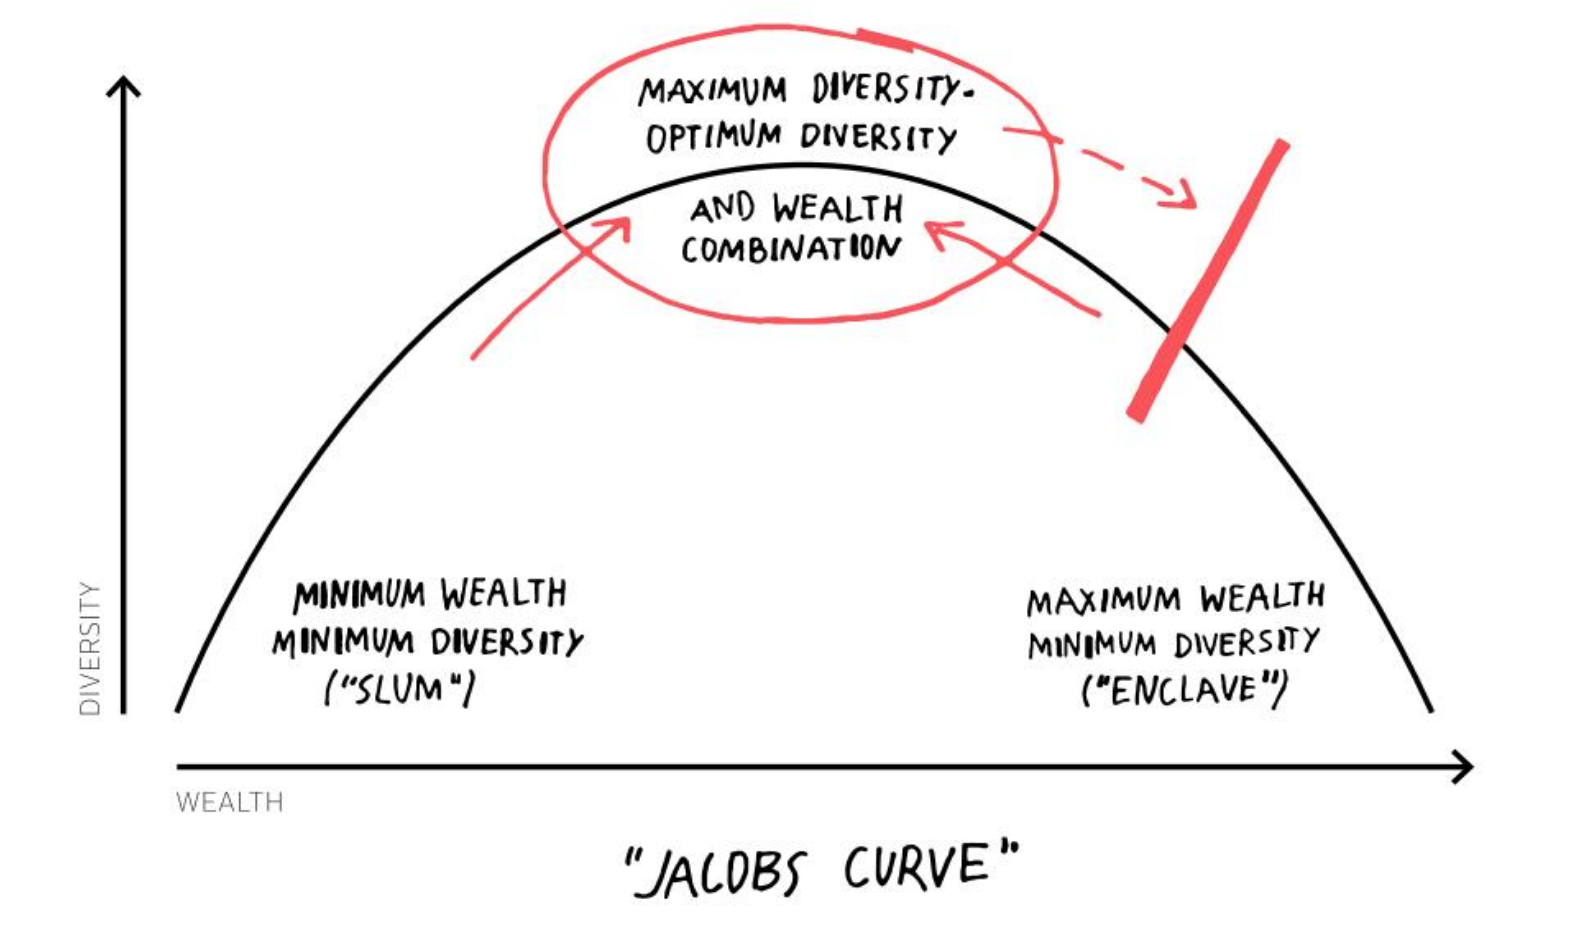 Jacob’s Curve displays the balance between slum and enclave to find the maximum diversity and wealth combinations. Source: Michael W. Mehaffy, 2019.